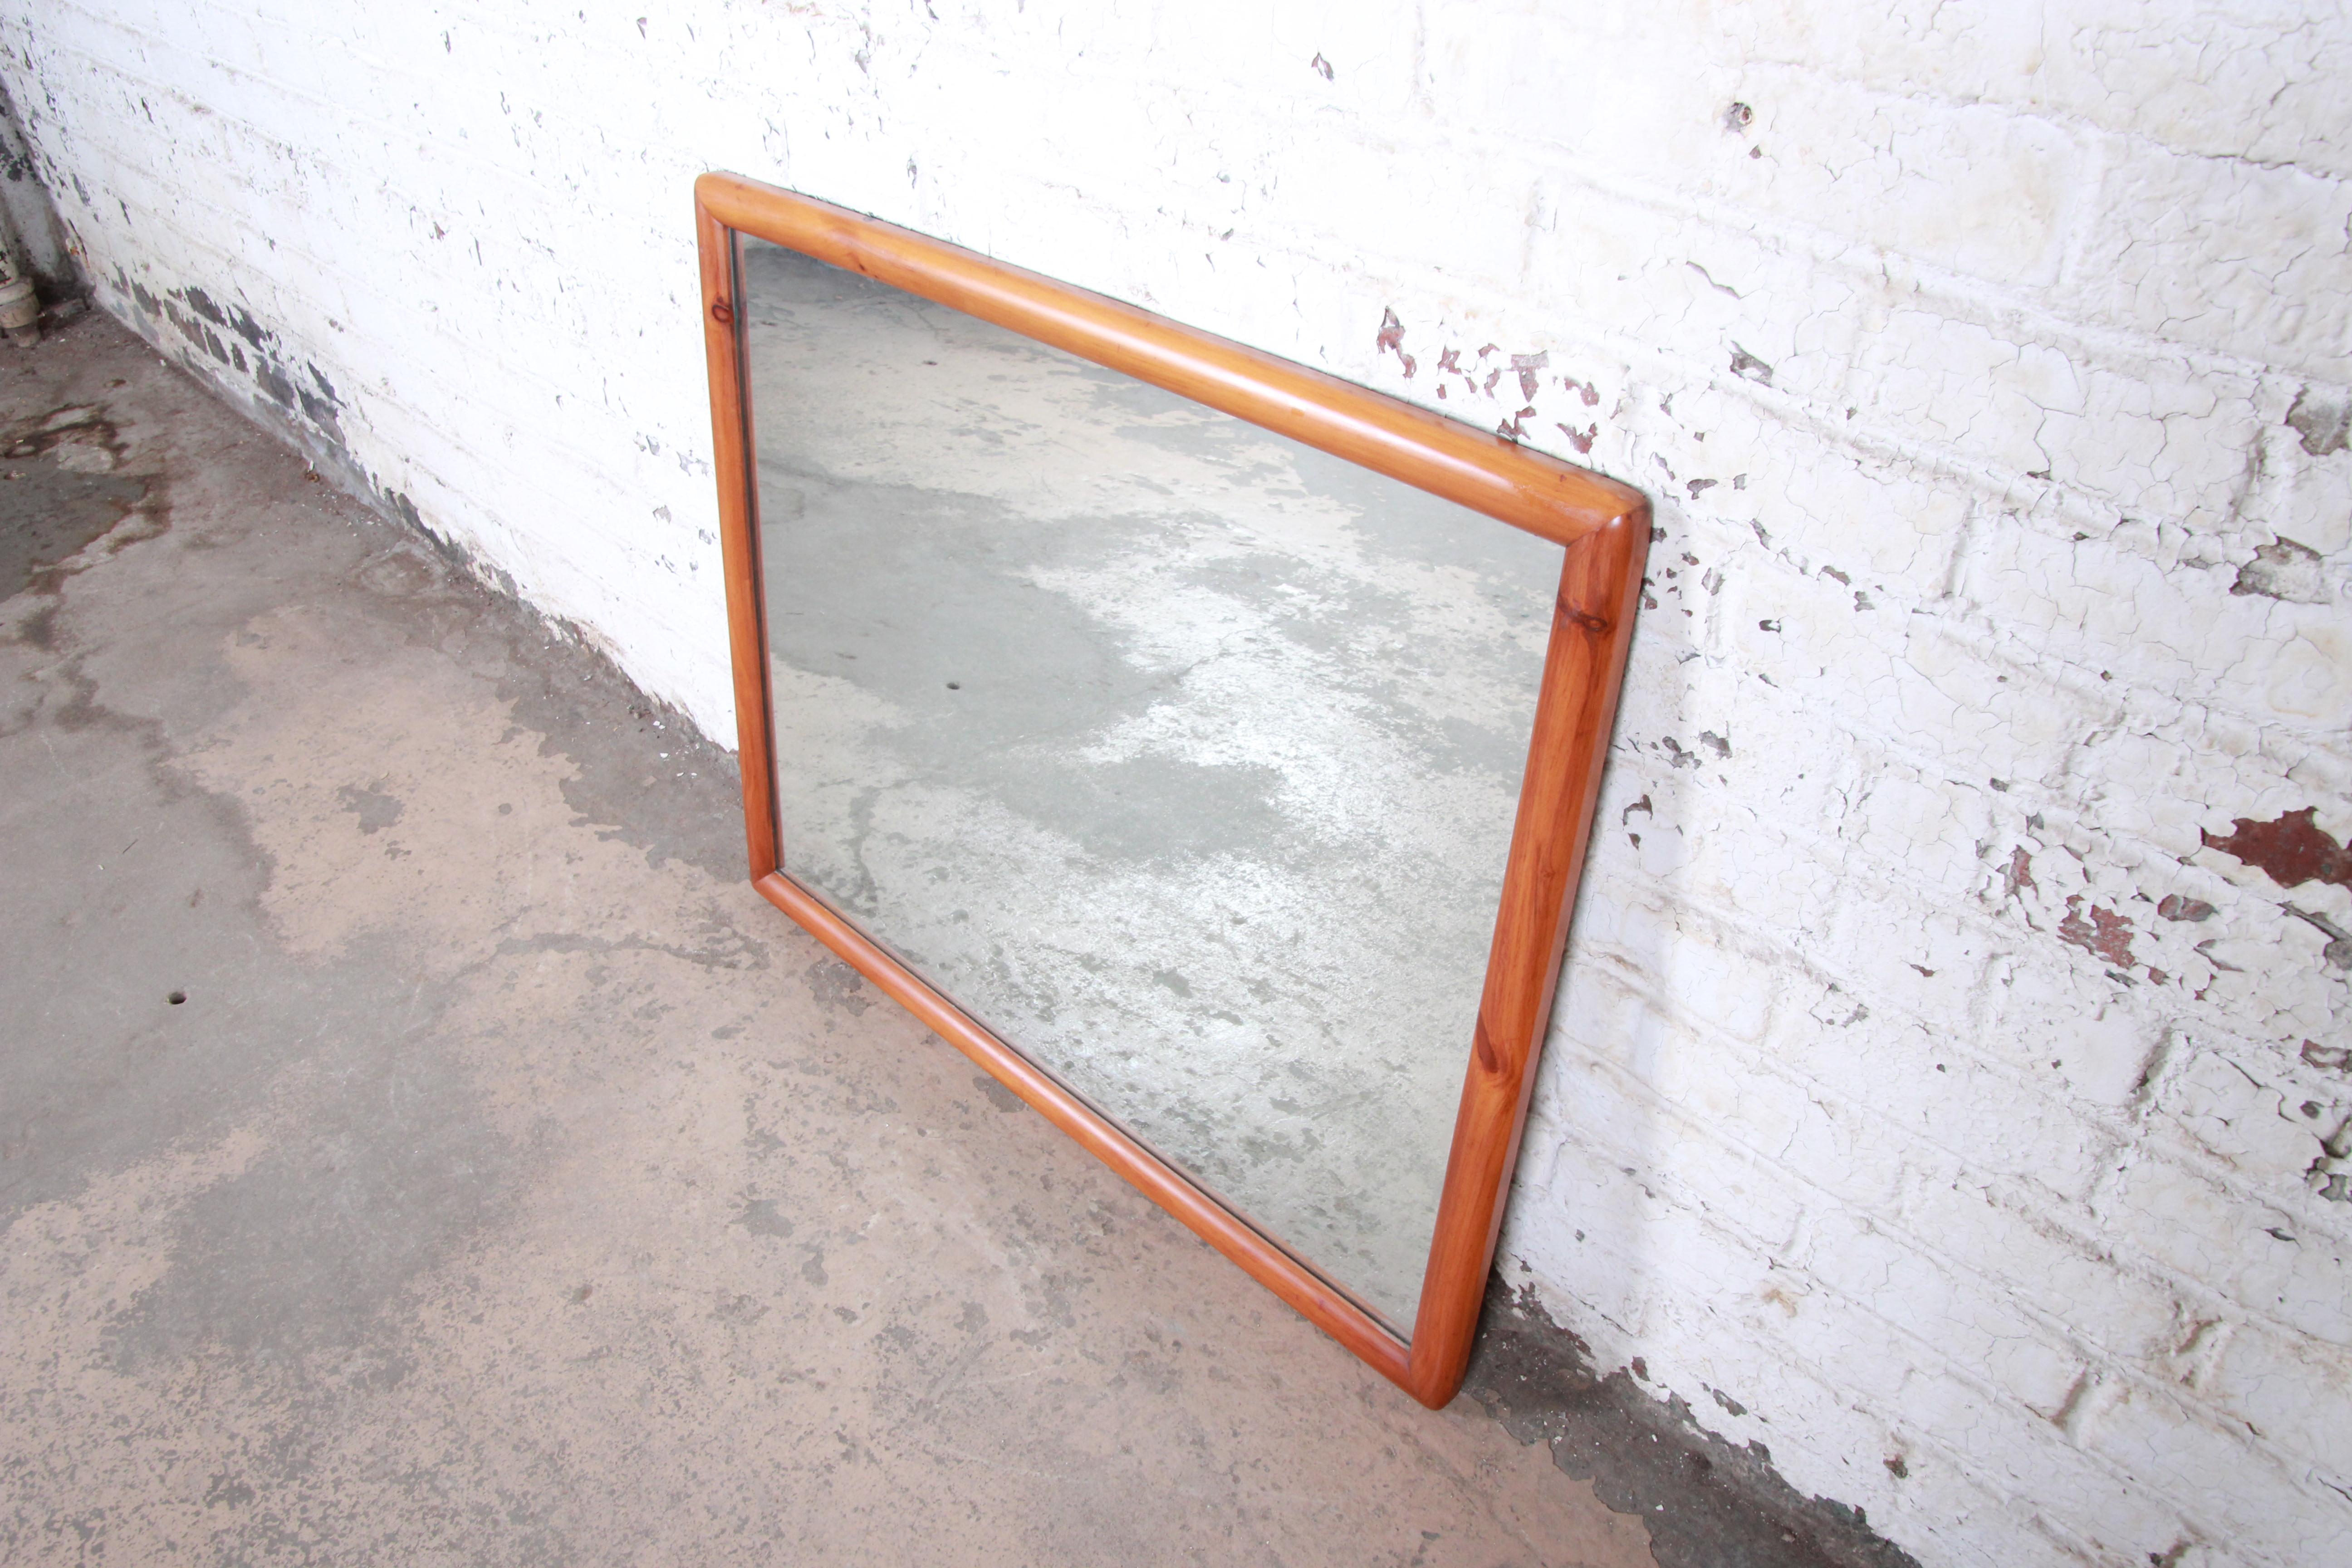 Midcentury rustic modern solid heart pine framed mirror

Made by Franklin Shockey Co.

USA, 1950s

Solid heart pine + mirror

Measures: 43.38